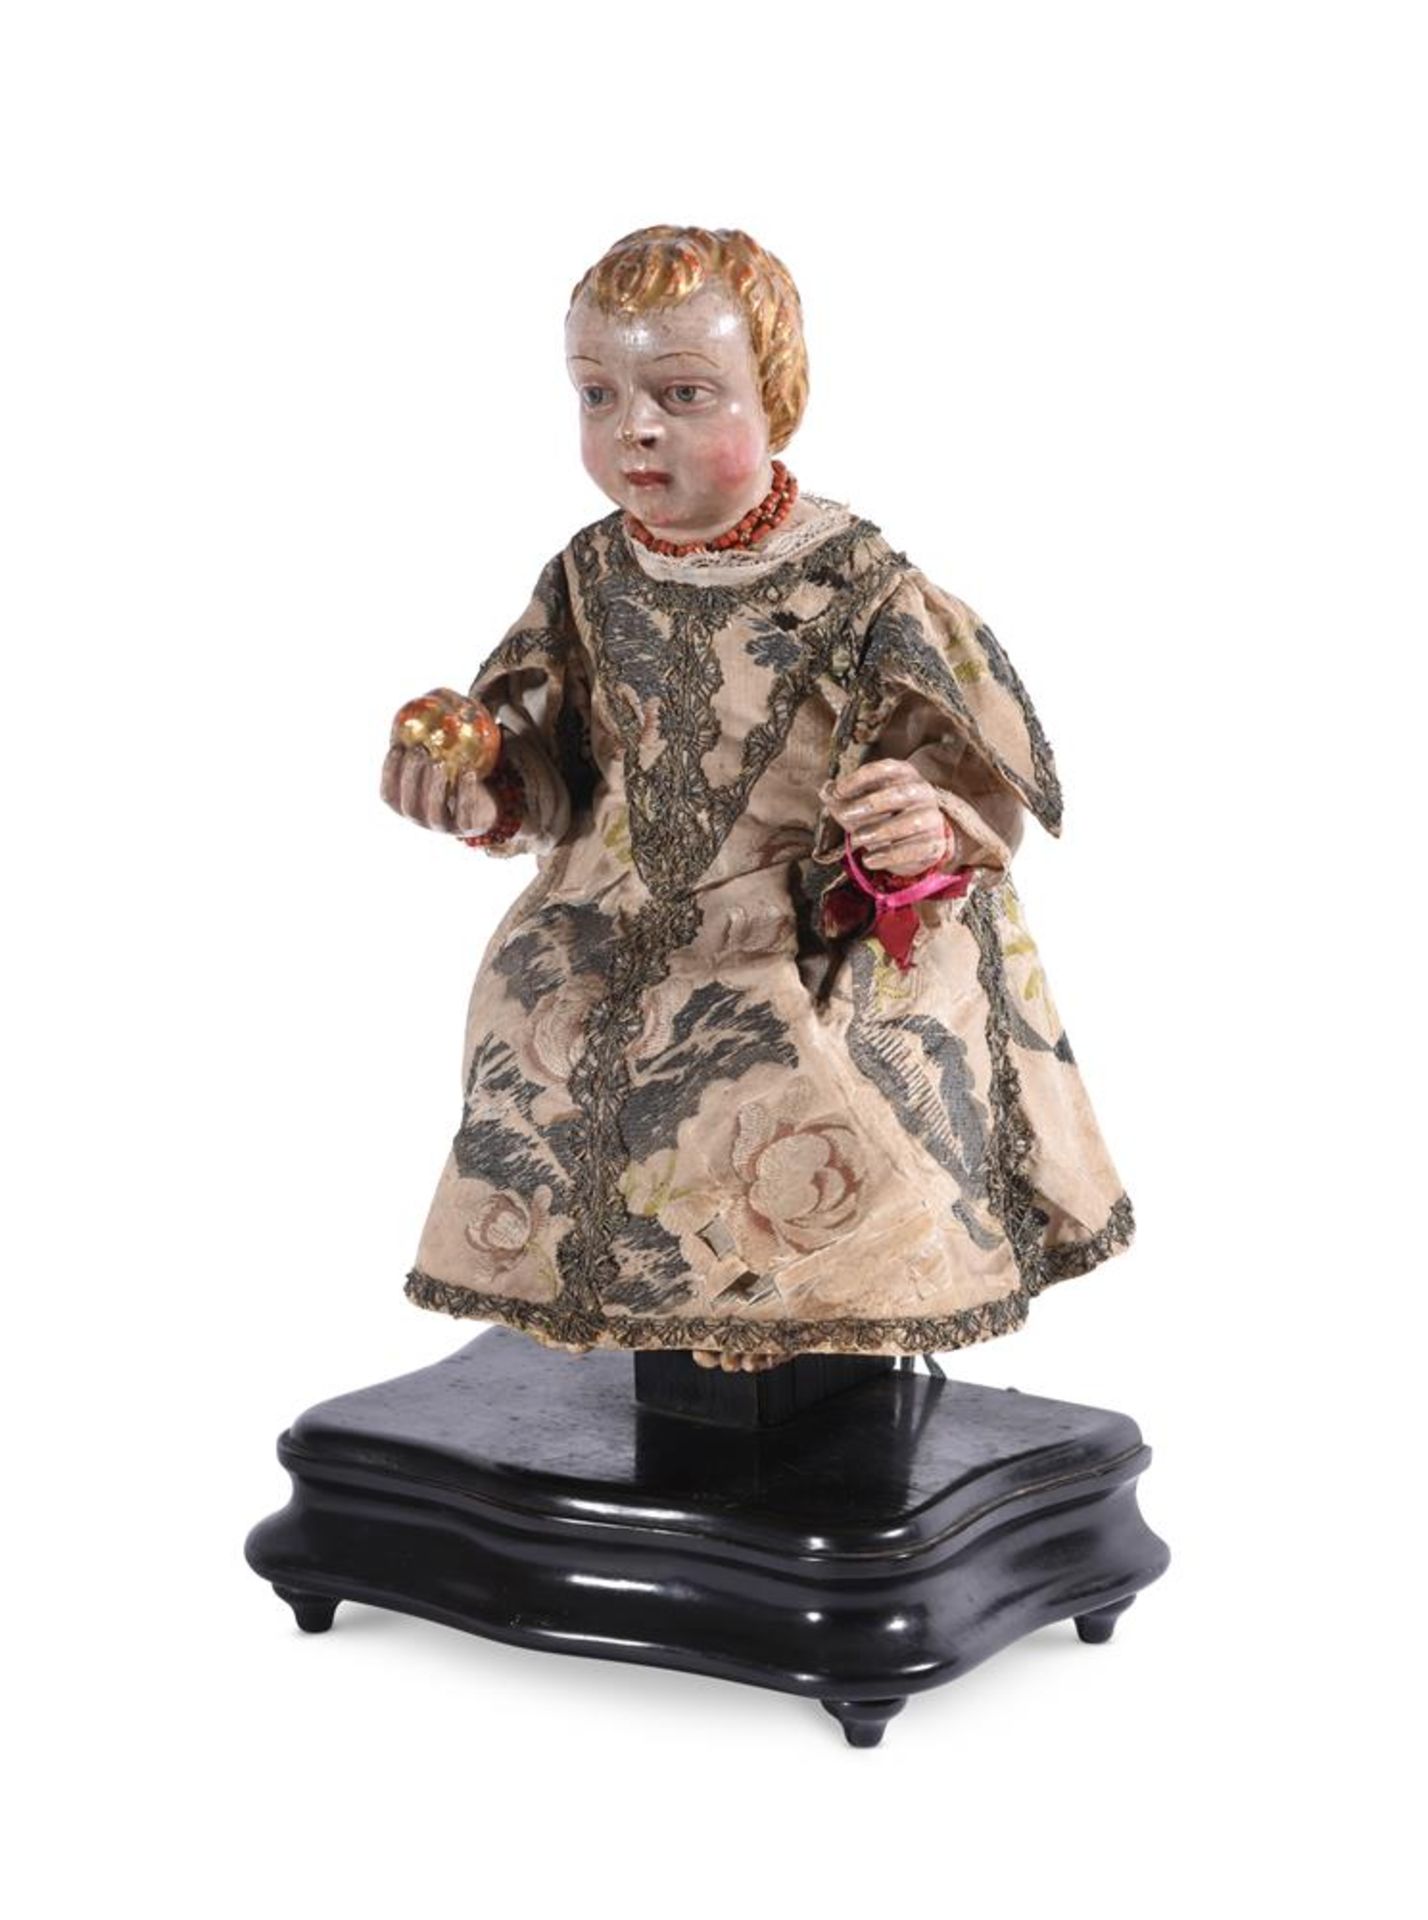 A SPANISH COLONIAL CARVED POLYCHROME FIGURE OF THE SEATED CHRIST